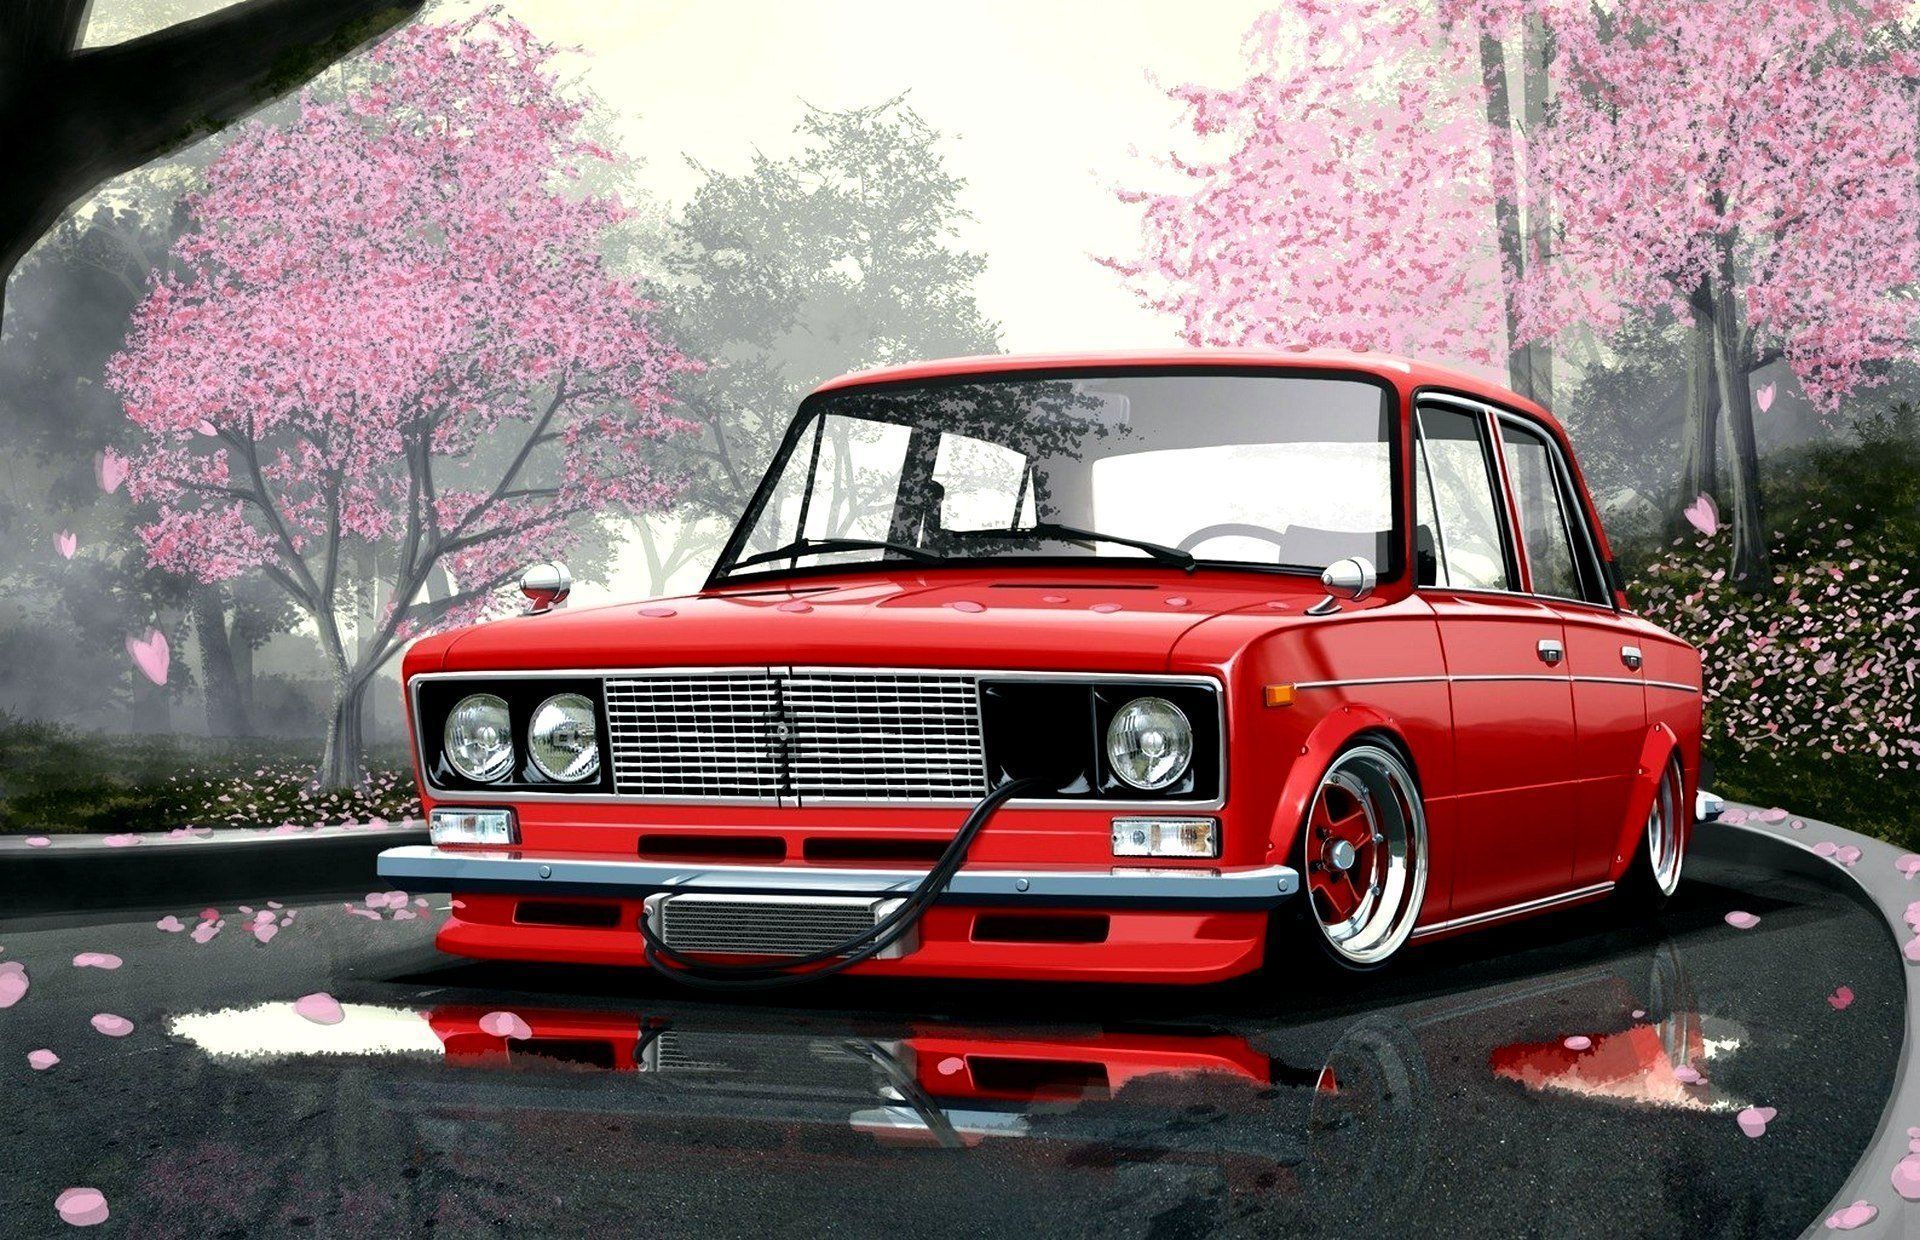 20 Greatest wallpaper aesthetic cars You Can Get It Free Of Charge ...